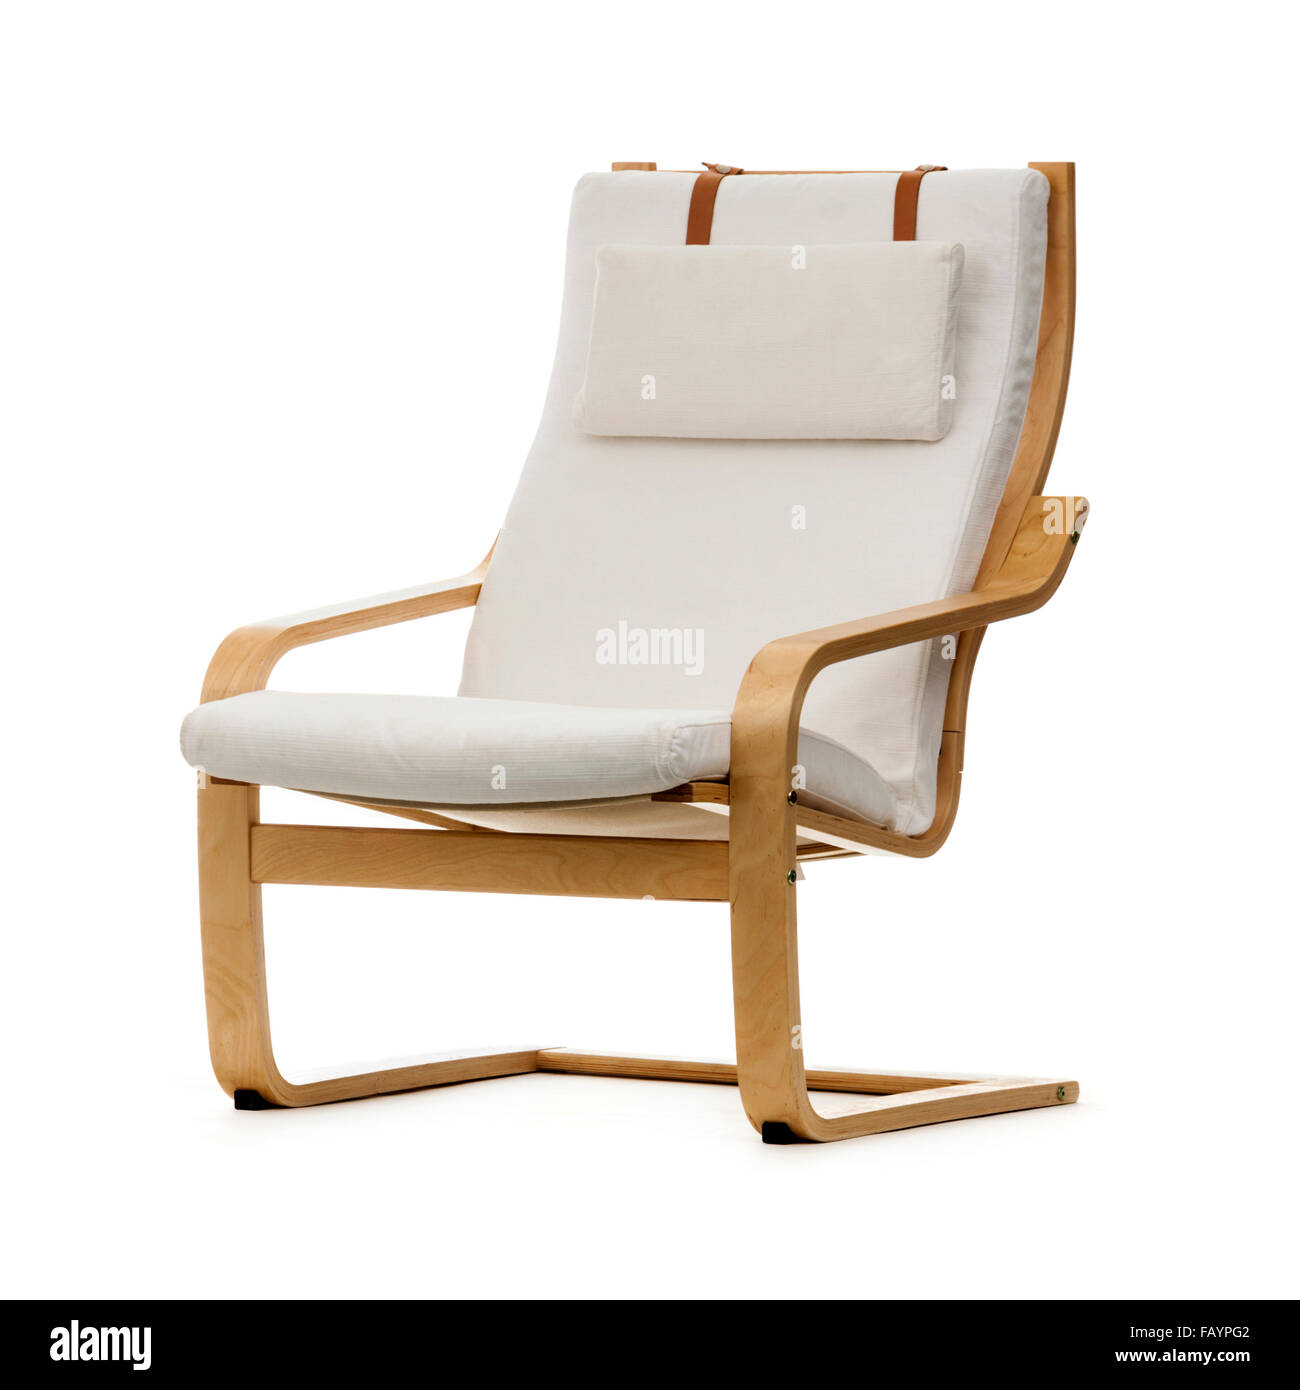 Ikea POÄNG chair, introduced in 1977 as the POEM and renamed to POÄNG in 1992. It's one of the company's iconic designs. Stock Photo